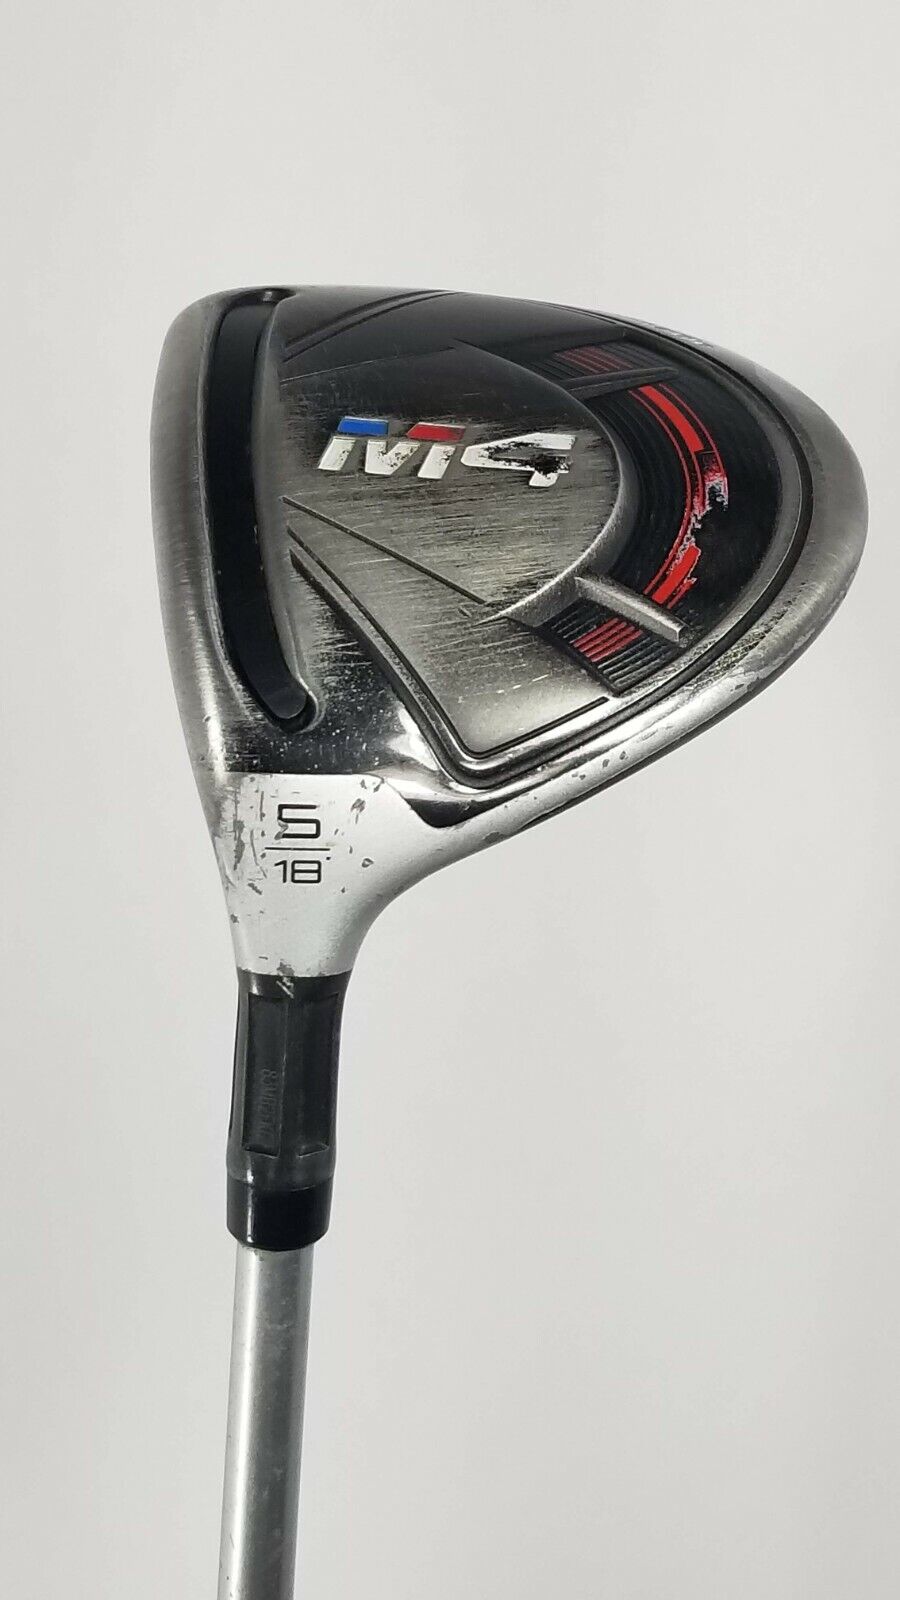 LEFTY TAYLORMADE M4 5-WOOD 18* LADIES TAYLORMADE 45 SHAFT FAIR